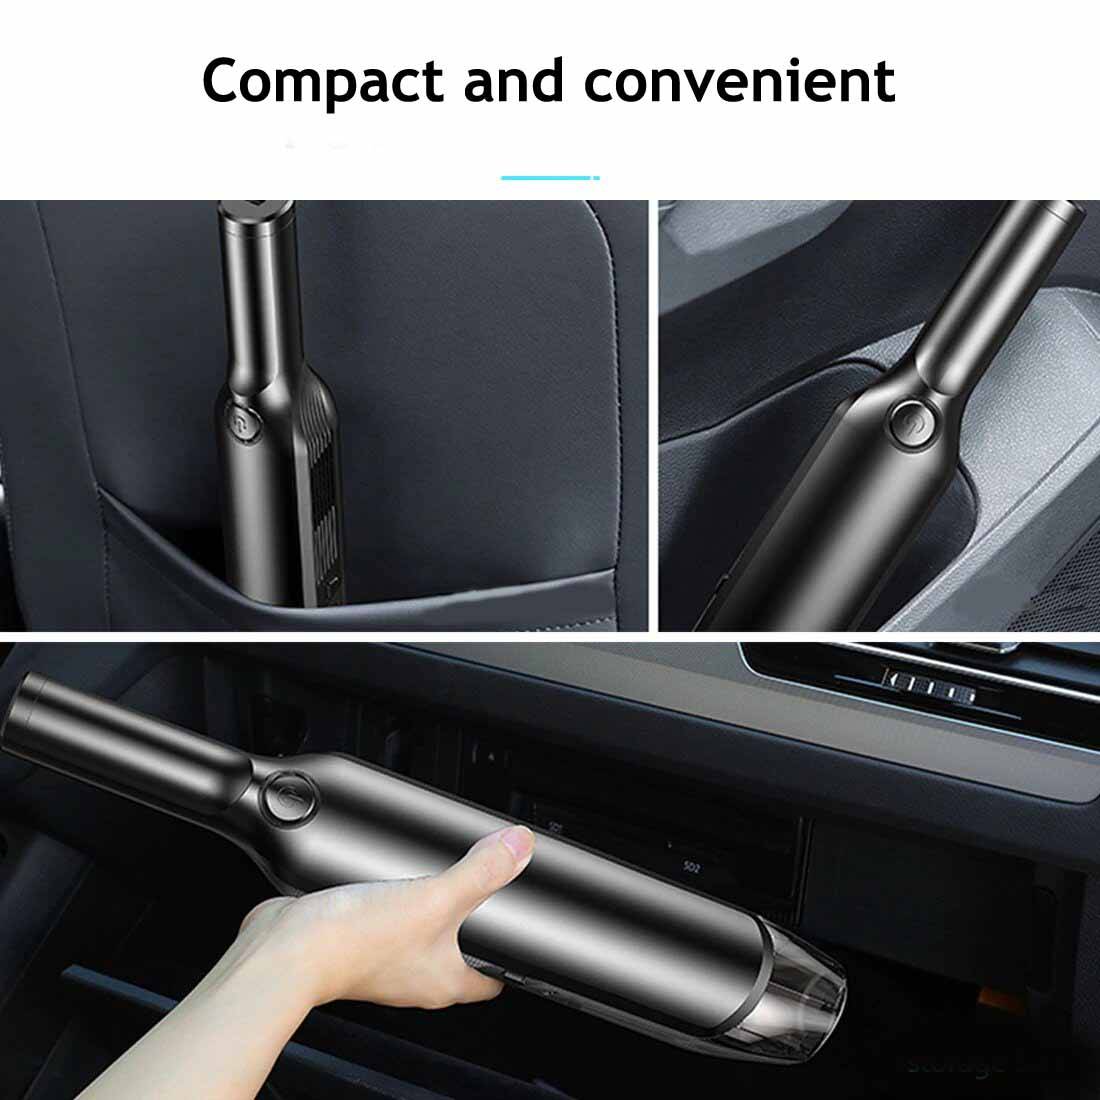 Compact Car Vacuum Cleaner Best Sellers Car Cleaning Type : Wired|Wireless 